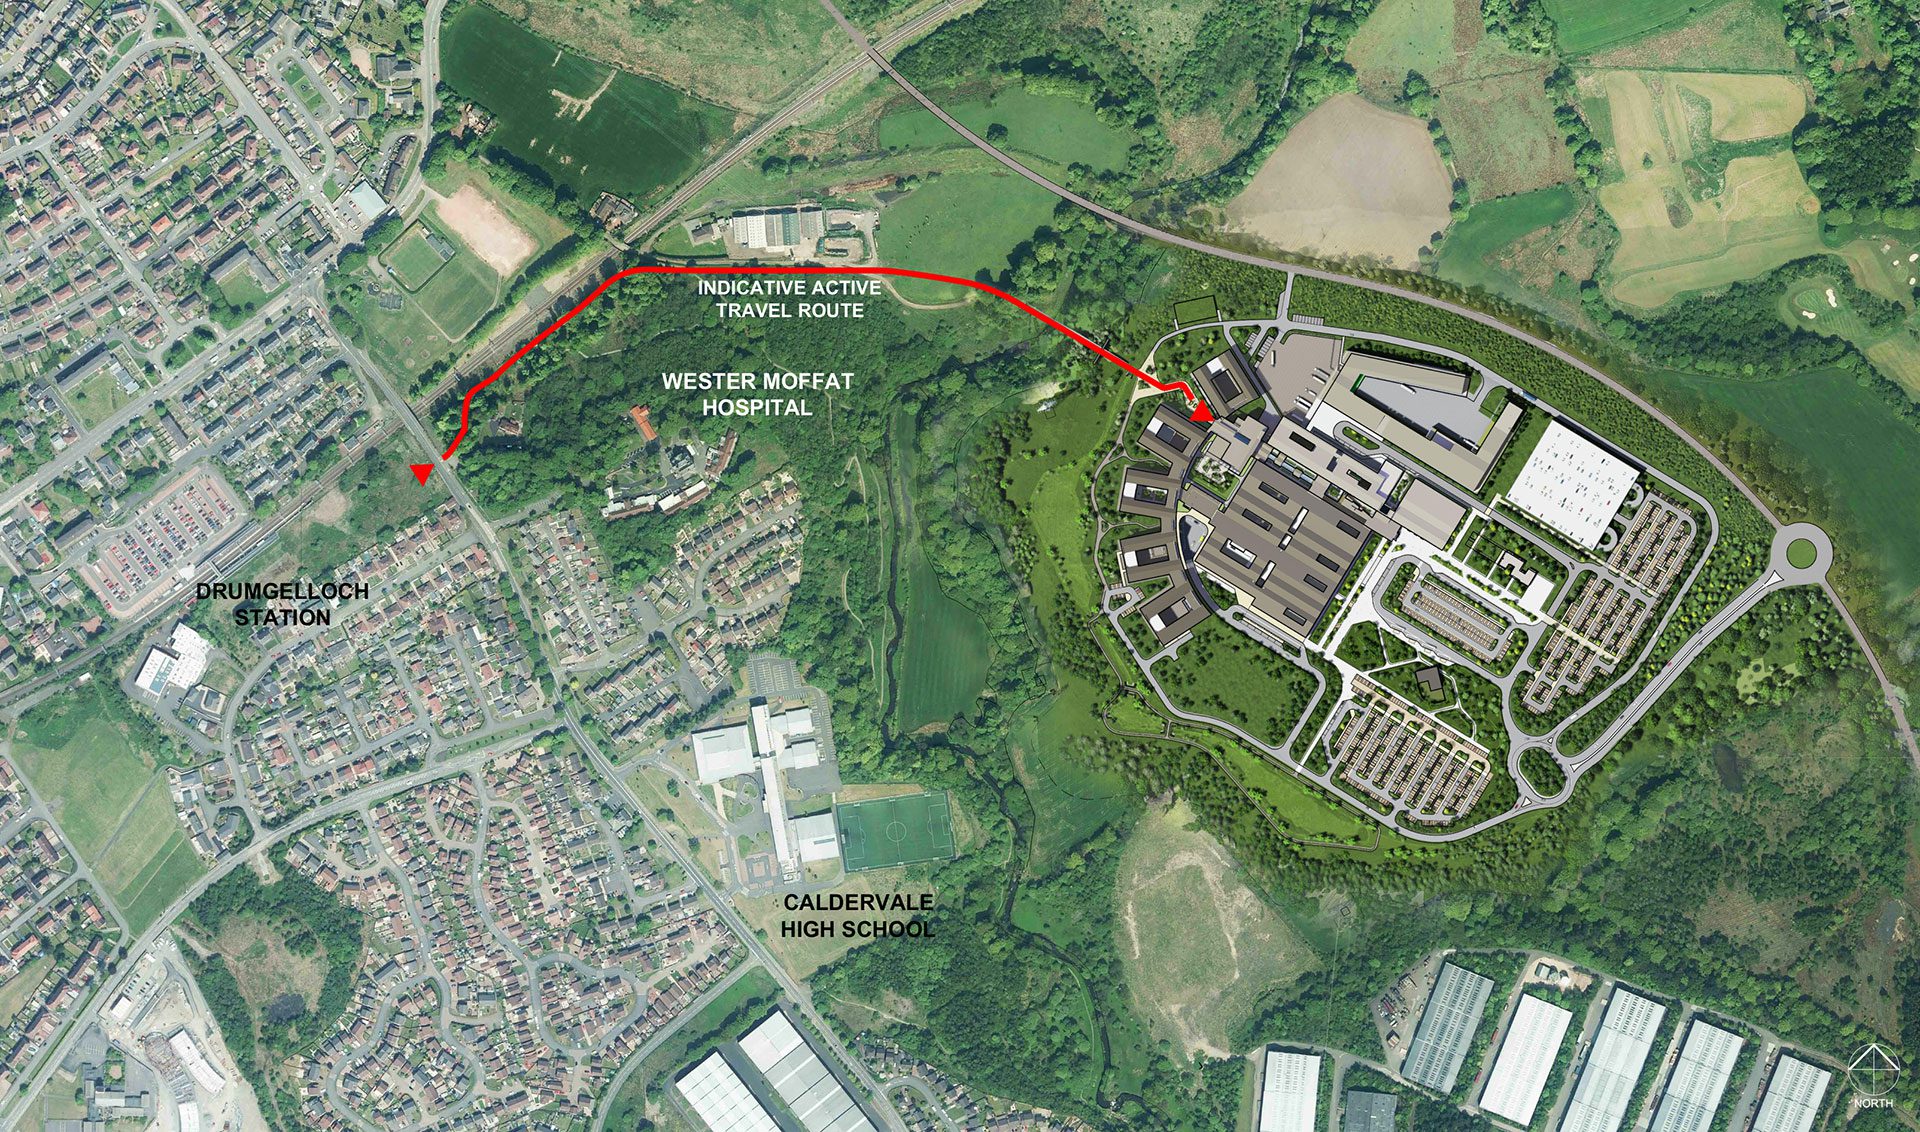 Monklands Indicative Active Travel Route